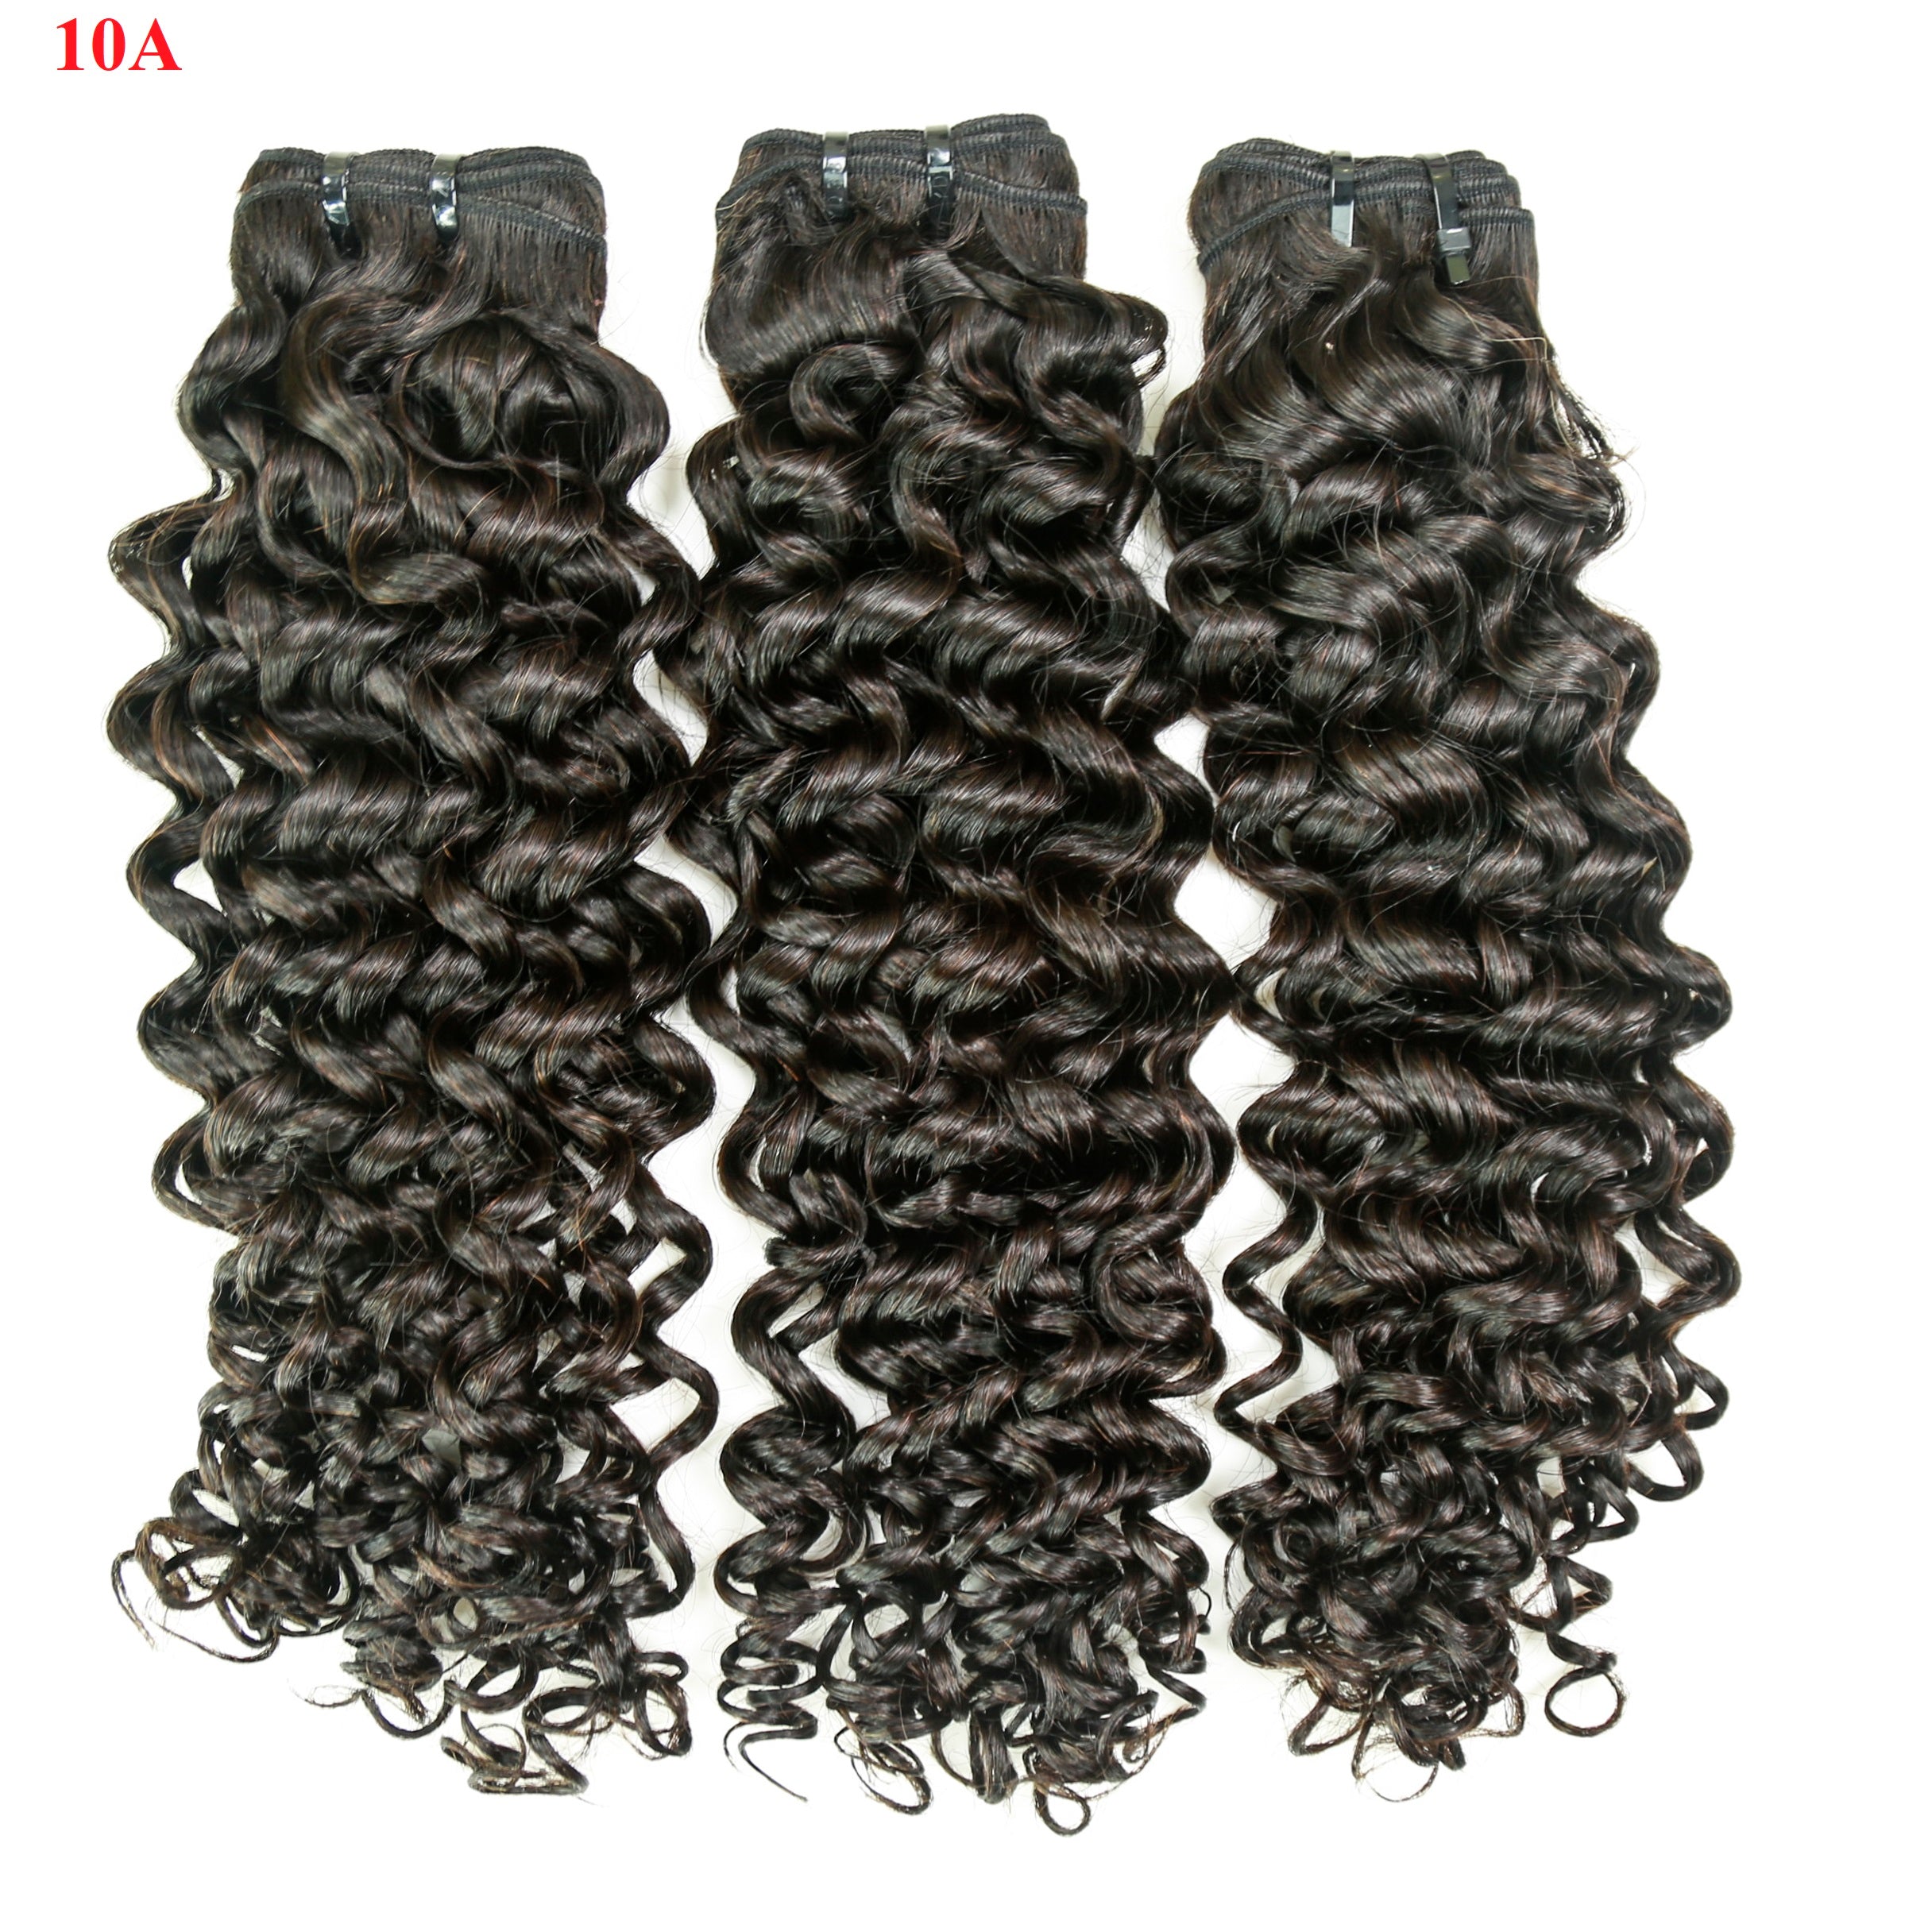 JP Hair 9A/10A/12A Jerry Curl Hair 3 Bundles with 4x4 Lace Closure Wet And Wavy